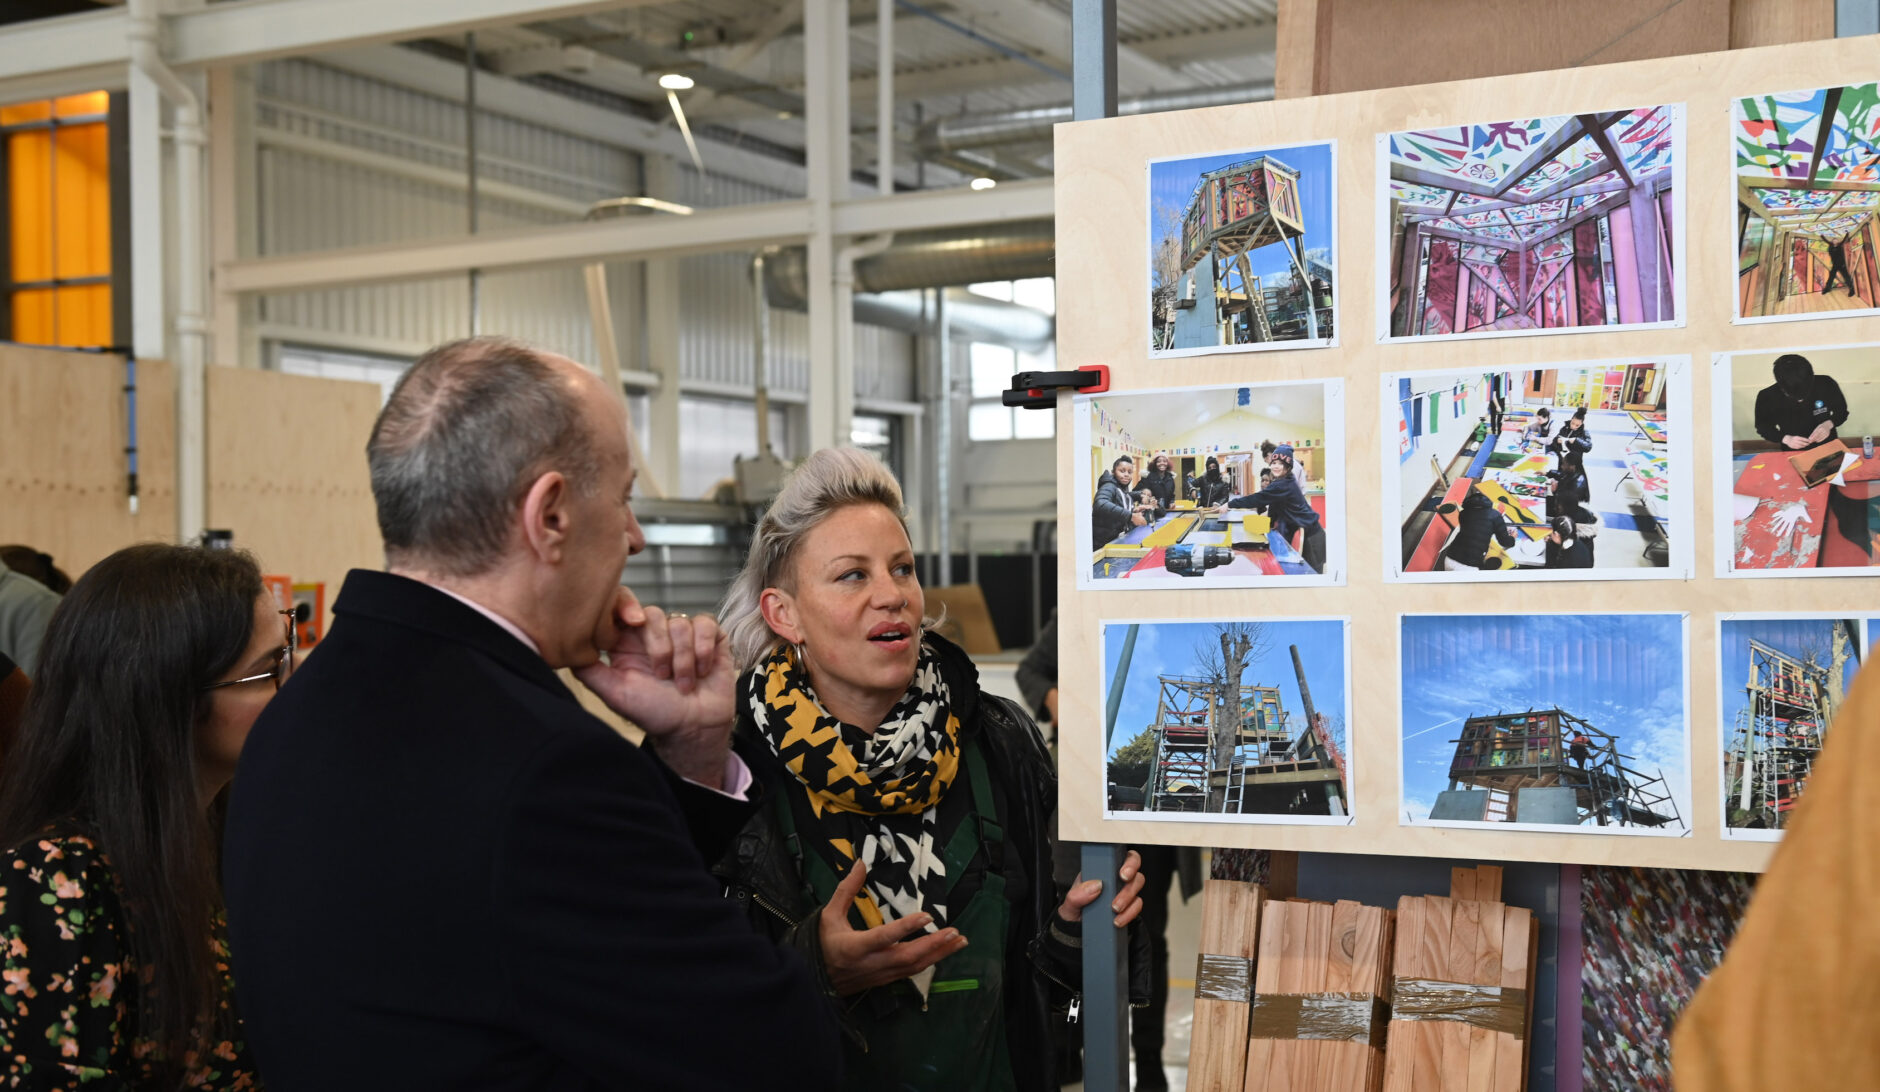 Bloqs' maker member Lizzy Fleming, founder of Made From Scratch, shows her work to Nesil Caliskan, Leader, Enfield Council, and Jules Pipe, Deputy Mayor of London, at the launch of Building Bloqs' new open access factory. Architects: 5th Studio. Photo: Stuart Wilson for Getty.